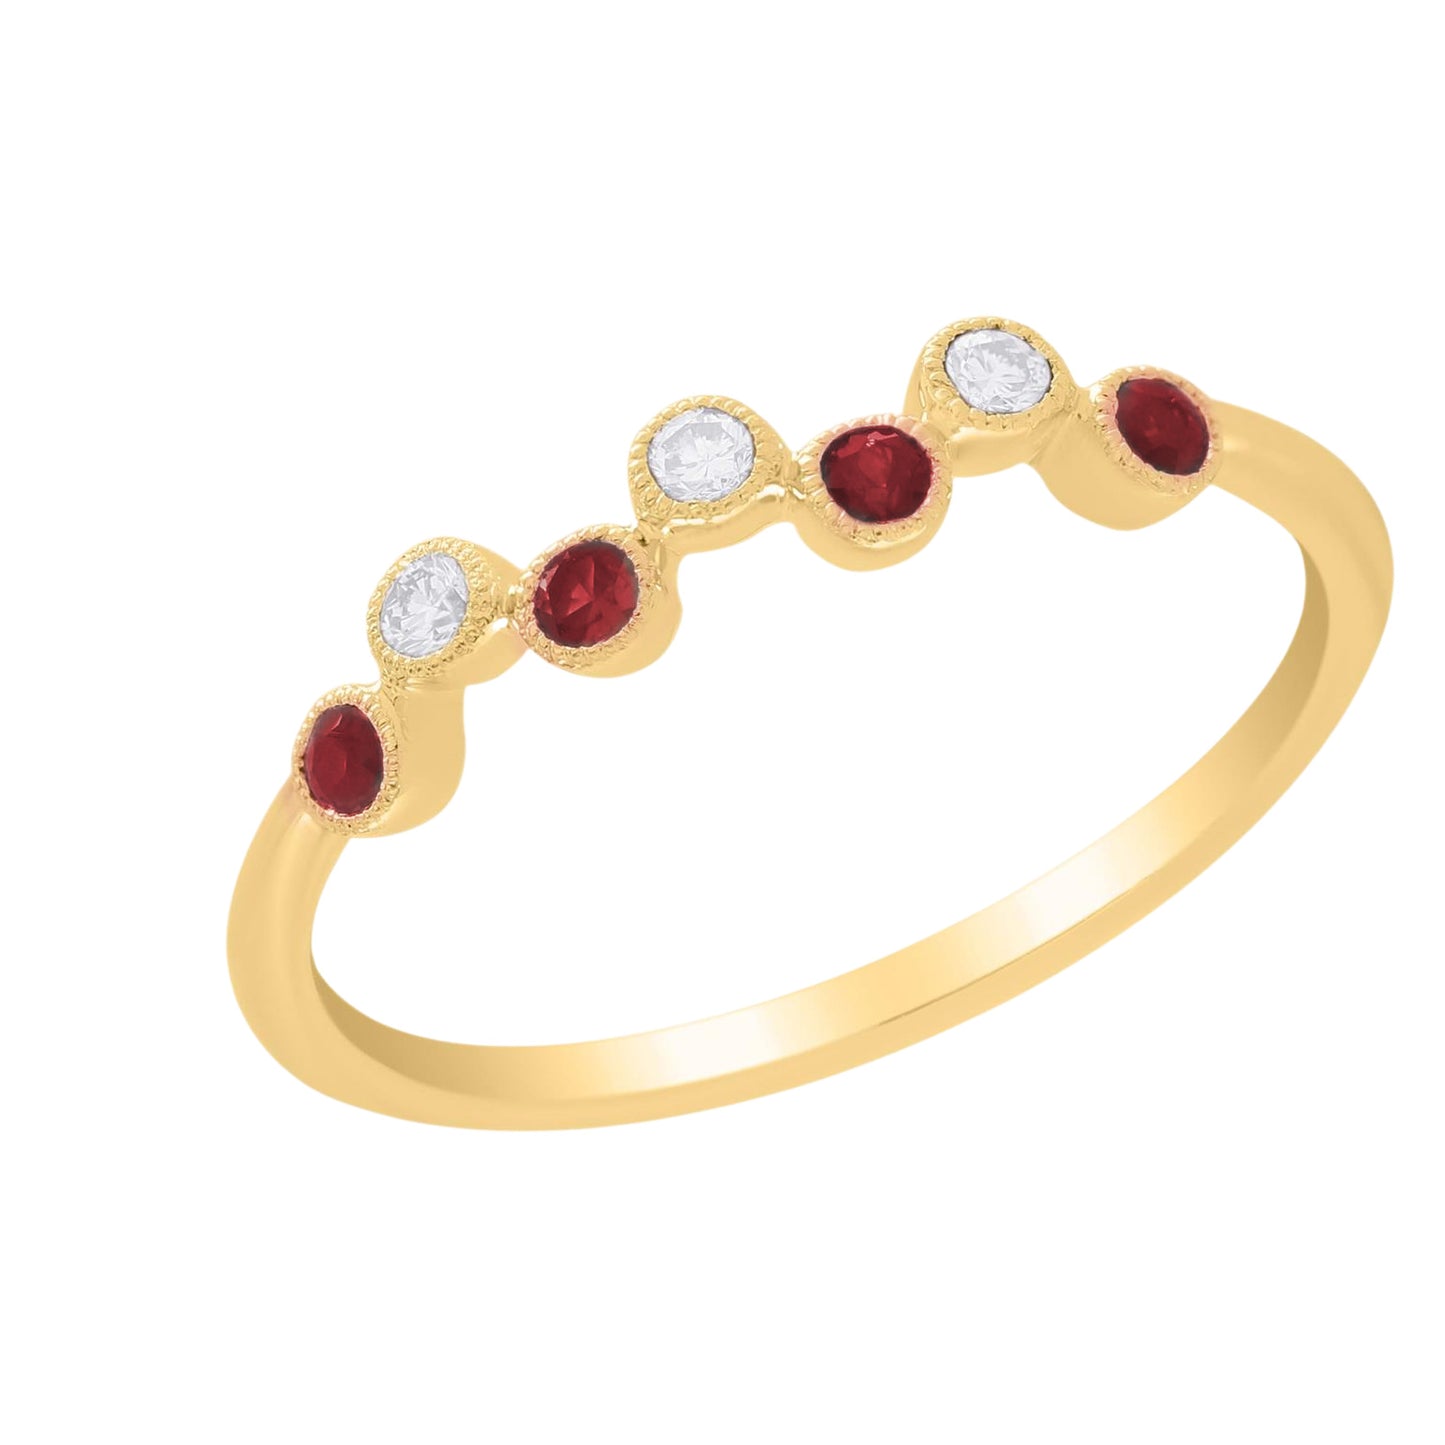 14K Gold Color Stone and Diamond Ring